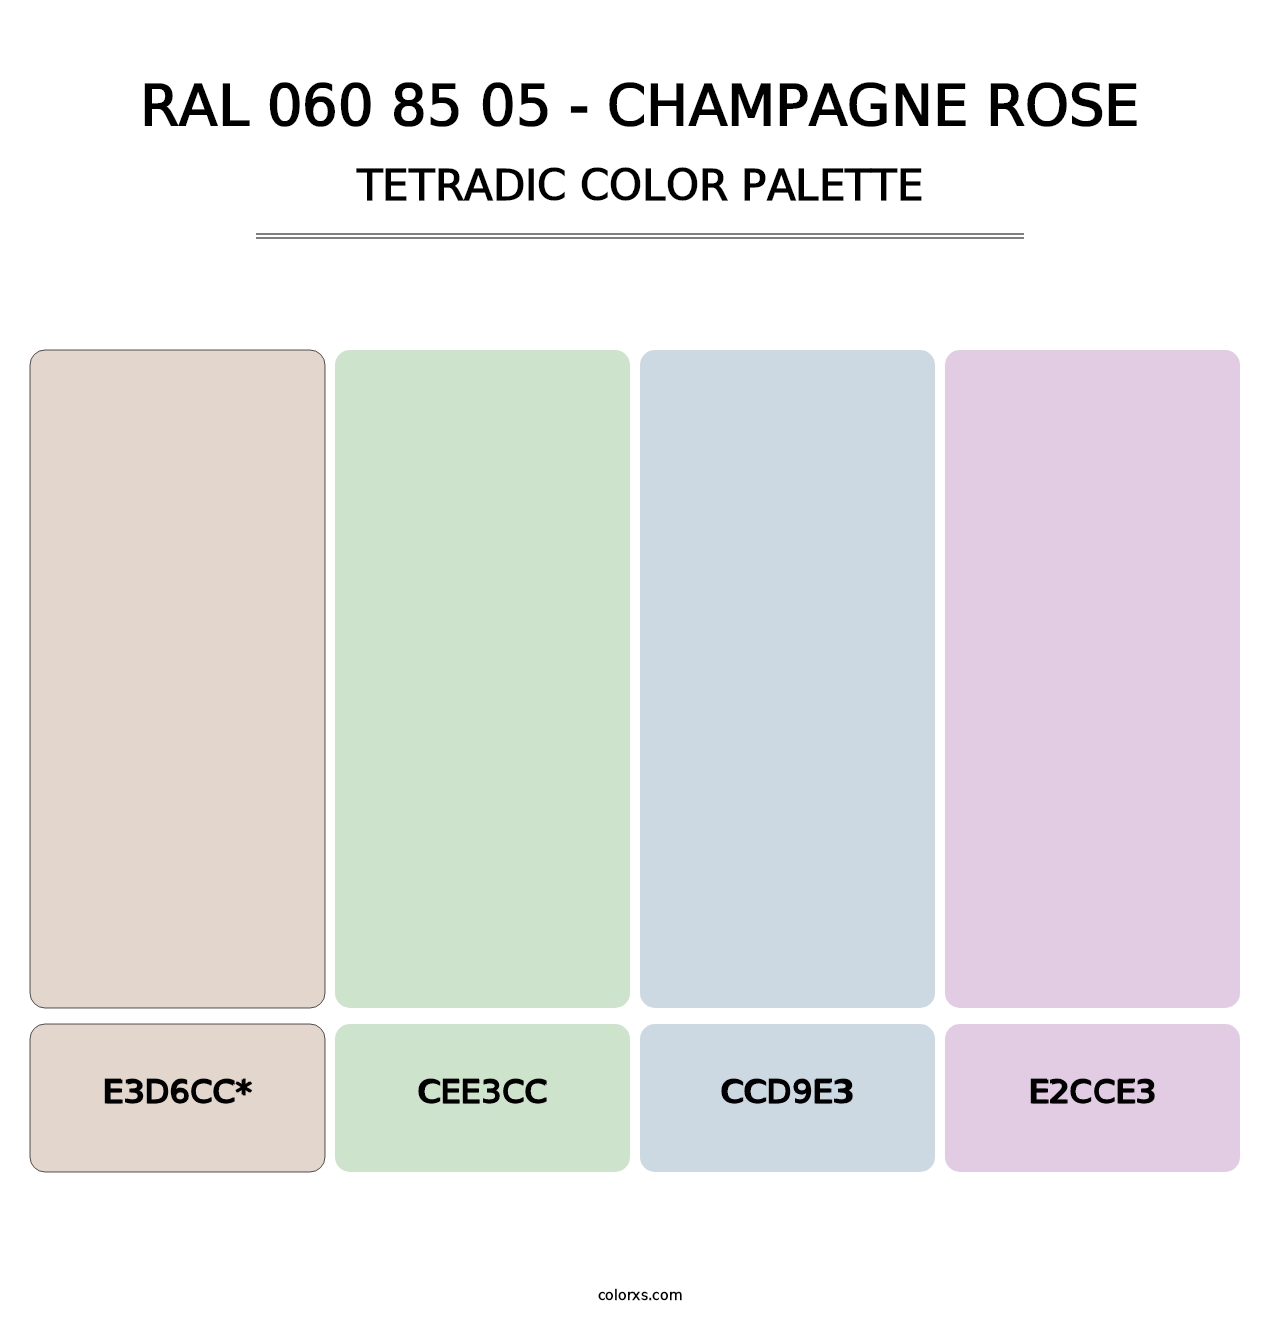 RAL 060 85 05 - Champagne Rose - Tetradic Color Palette